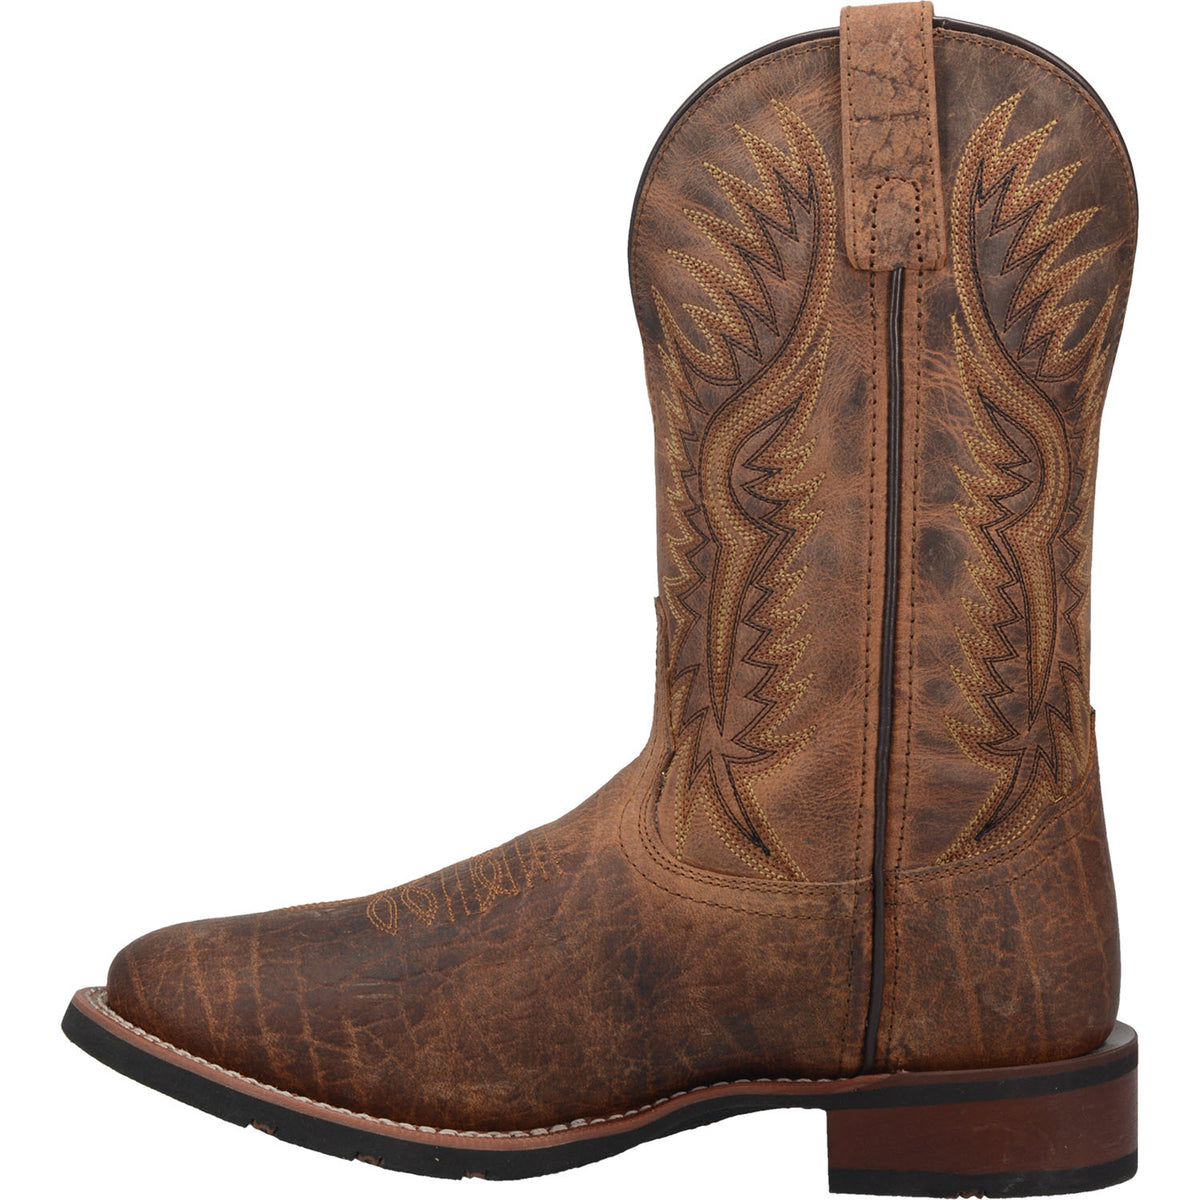 PINETOP LEATHER BOOT Cover